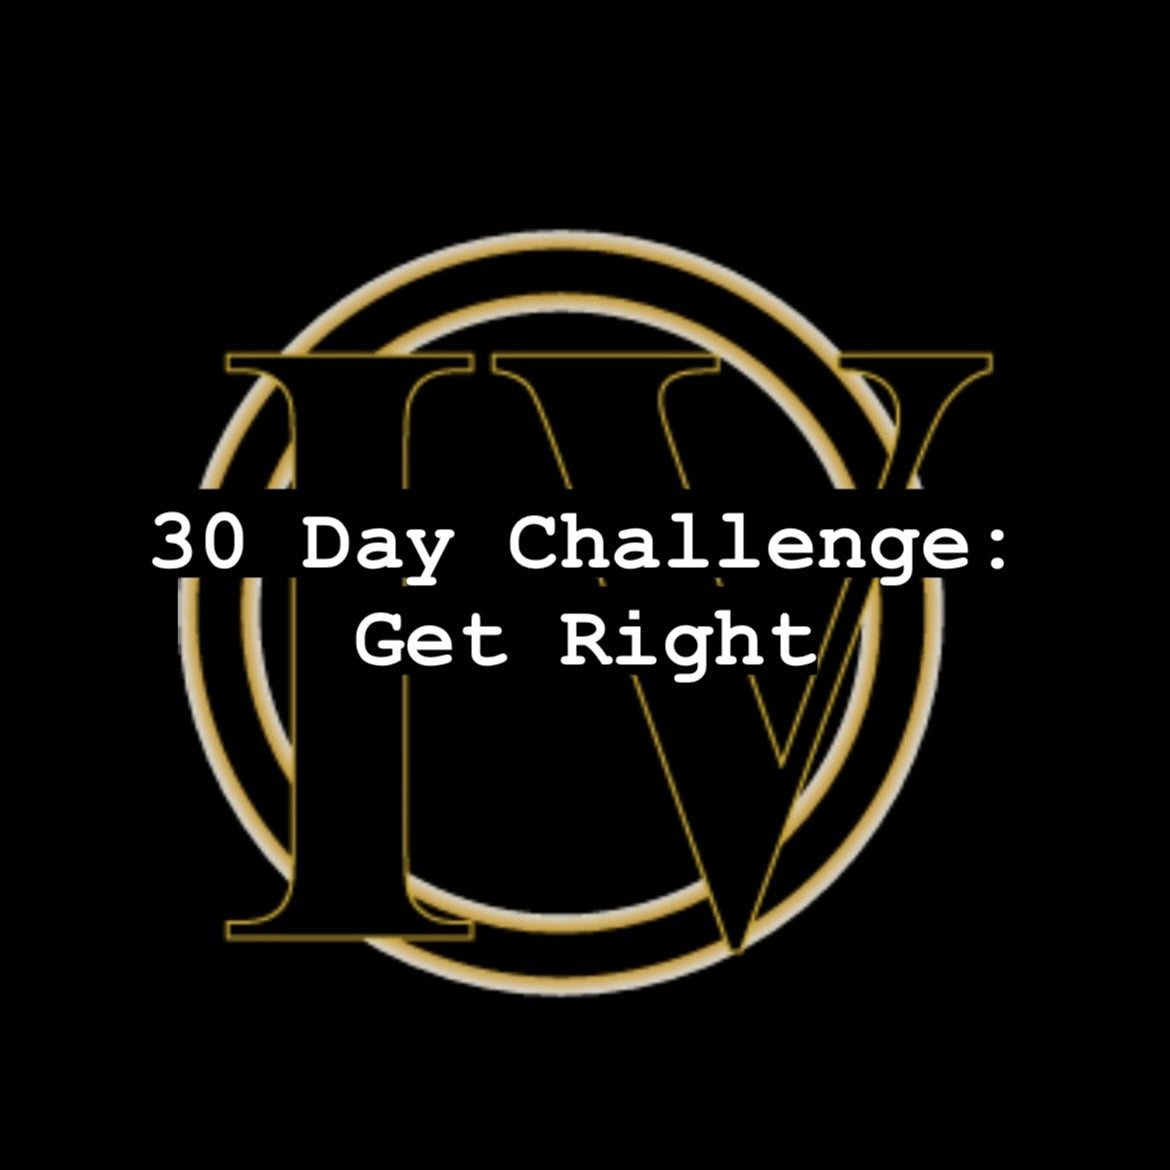 30 Day Challenge: Get Right